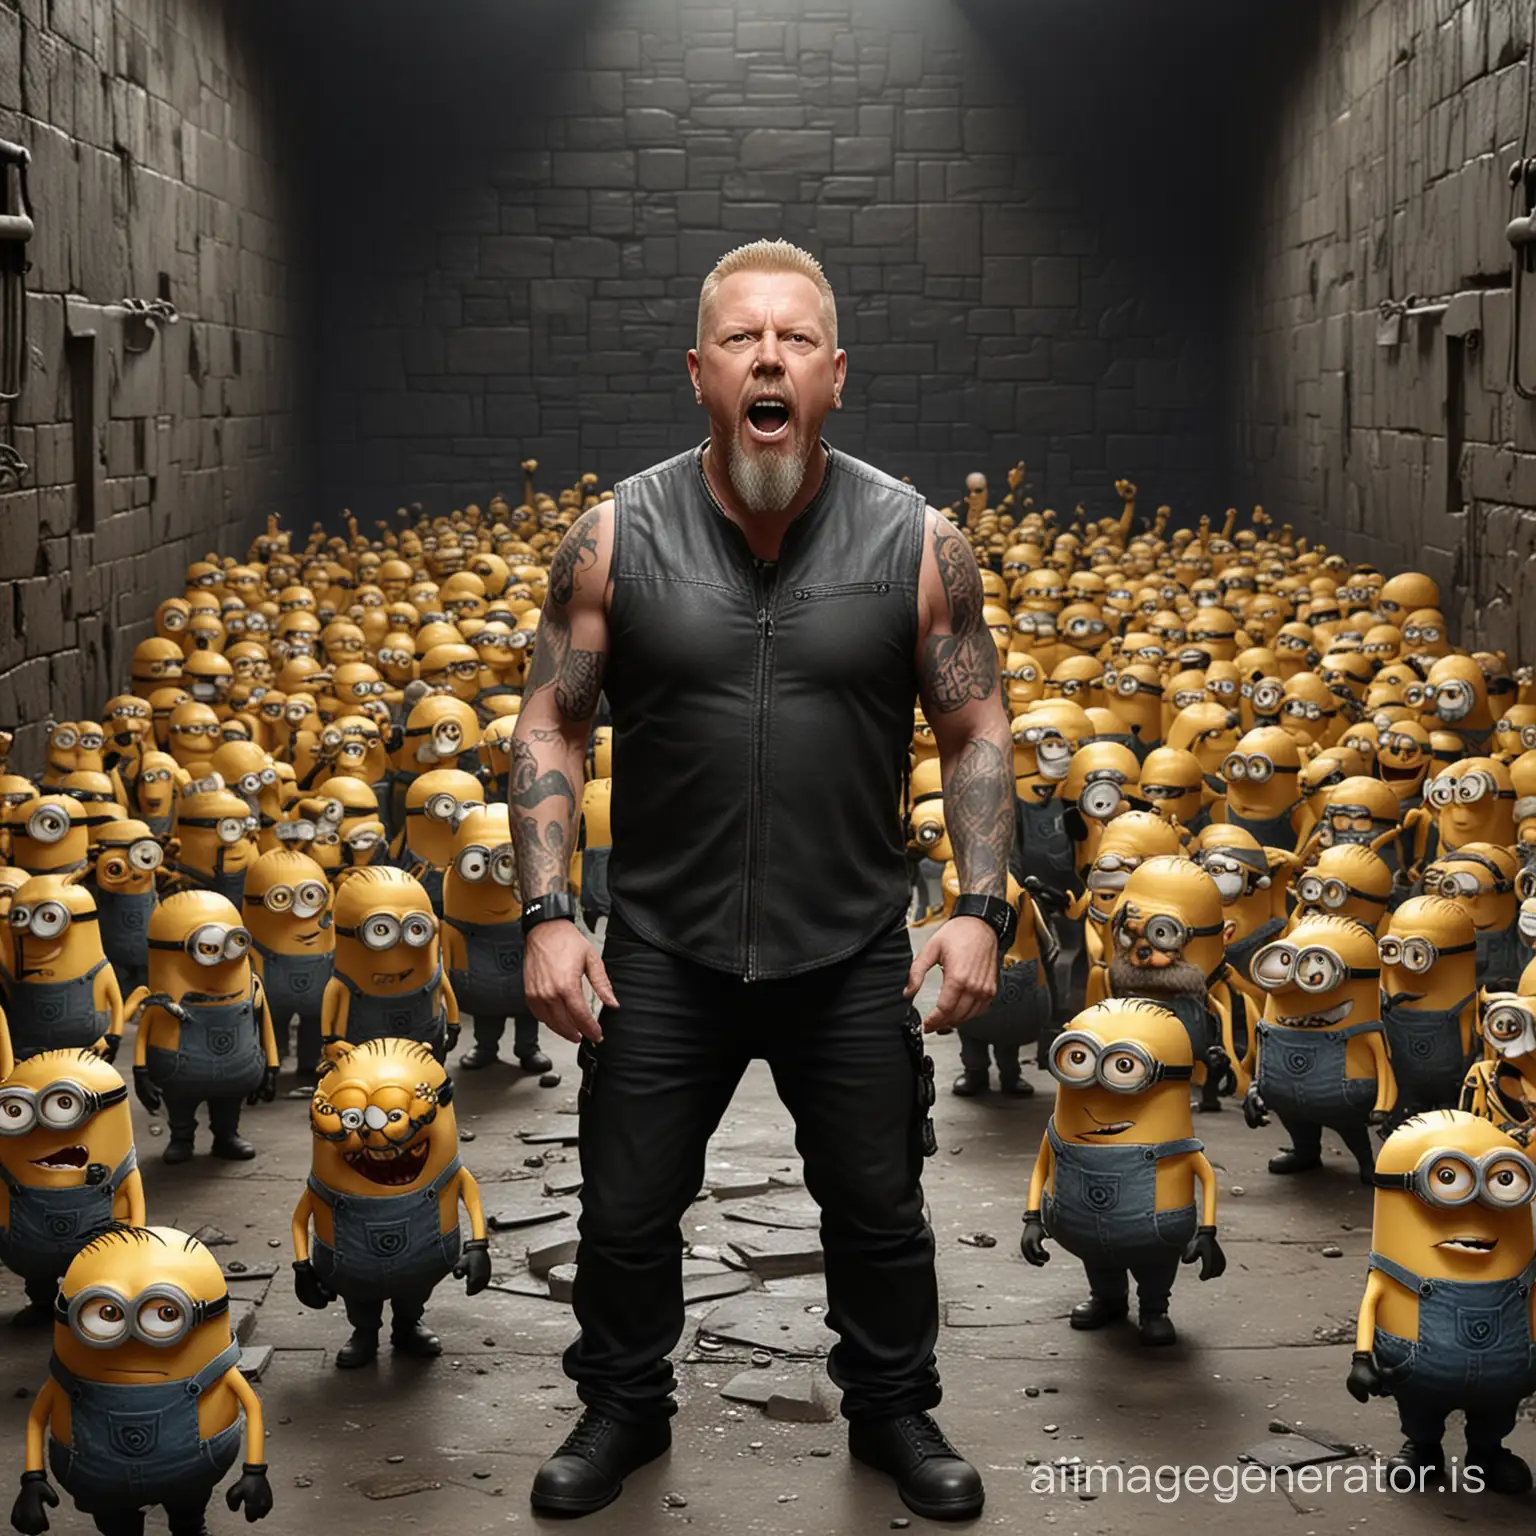 James Hetfield full body bald head with beard surround by minions, in a dungeon, 3d, detailed, realism